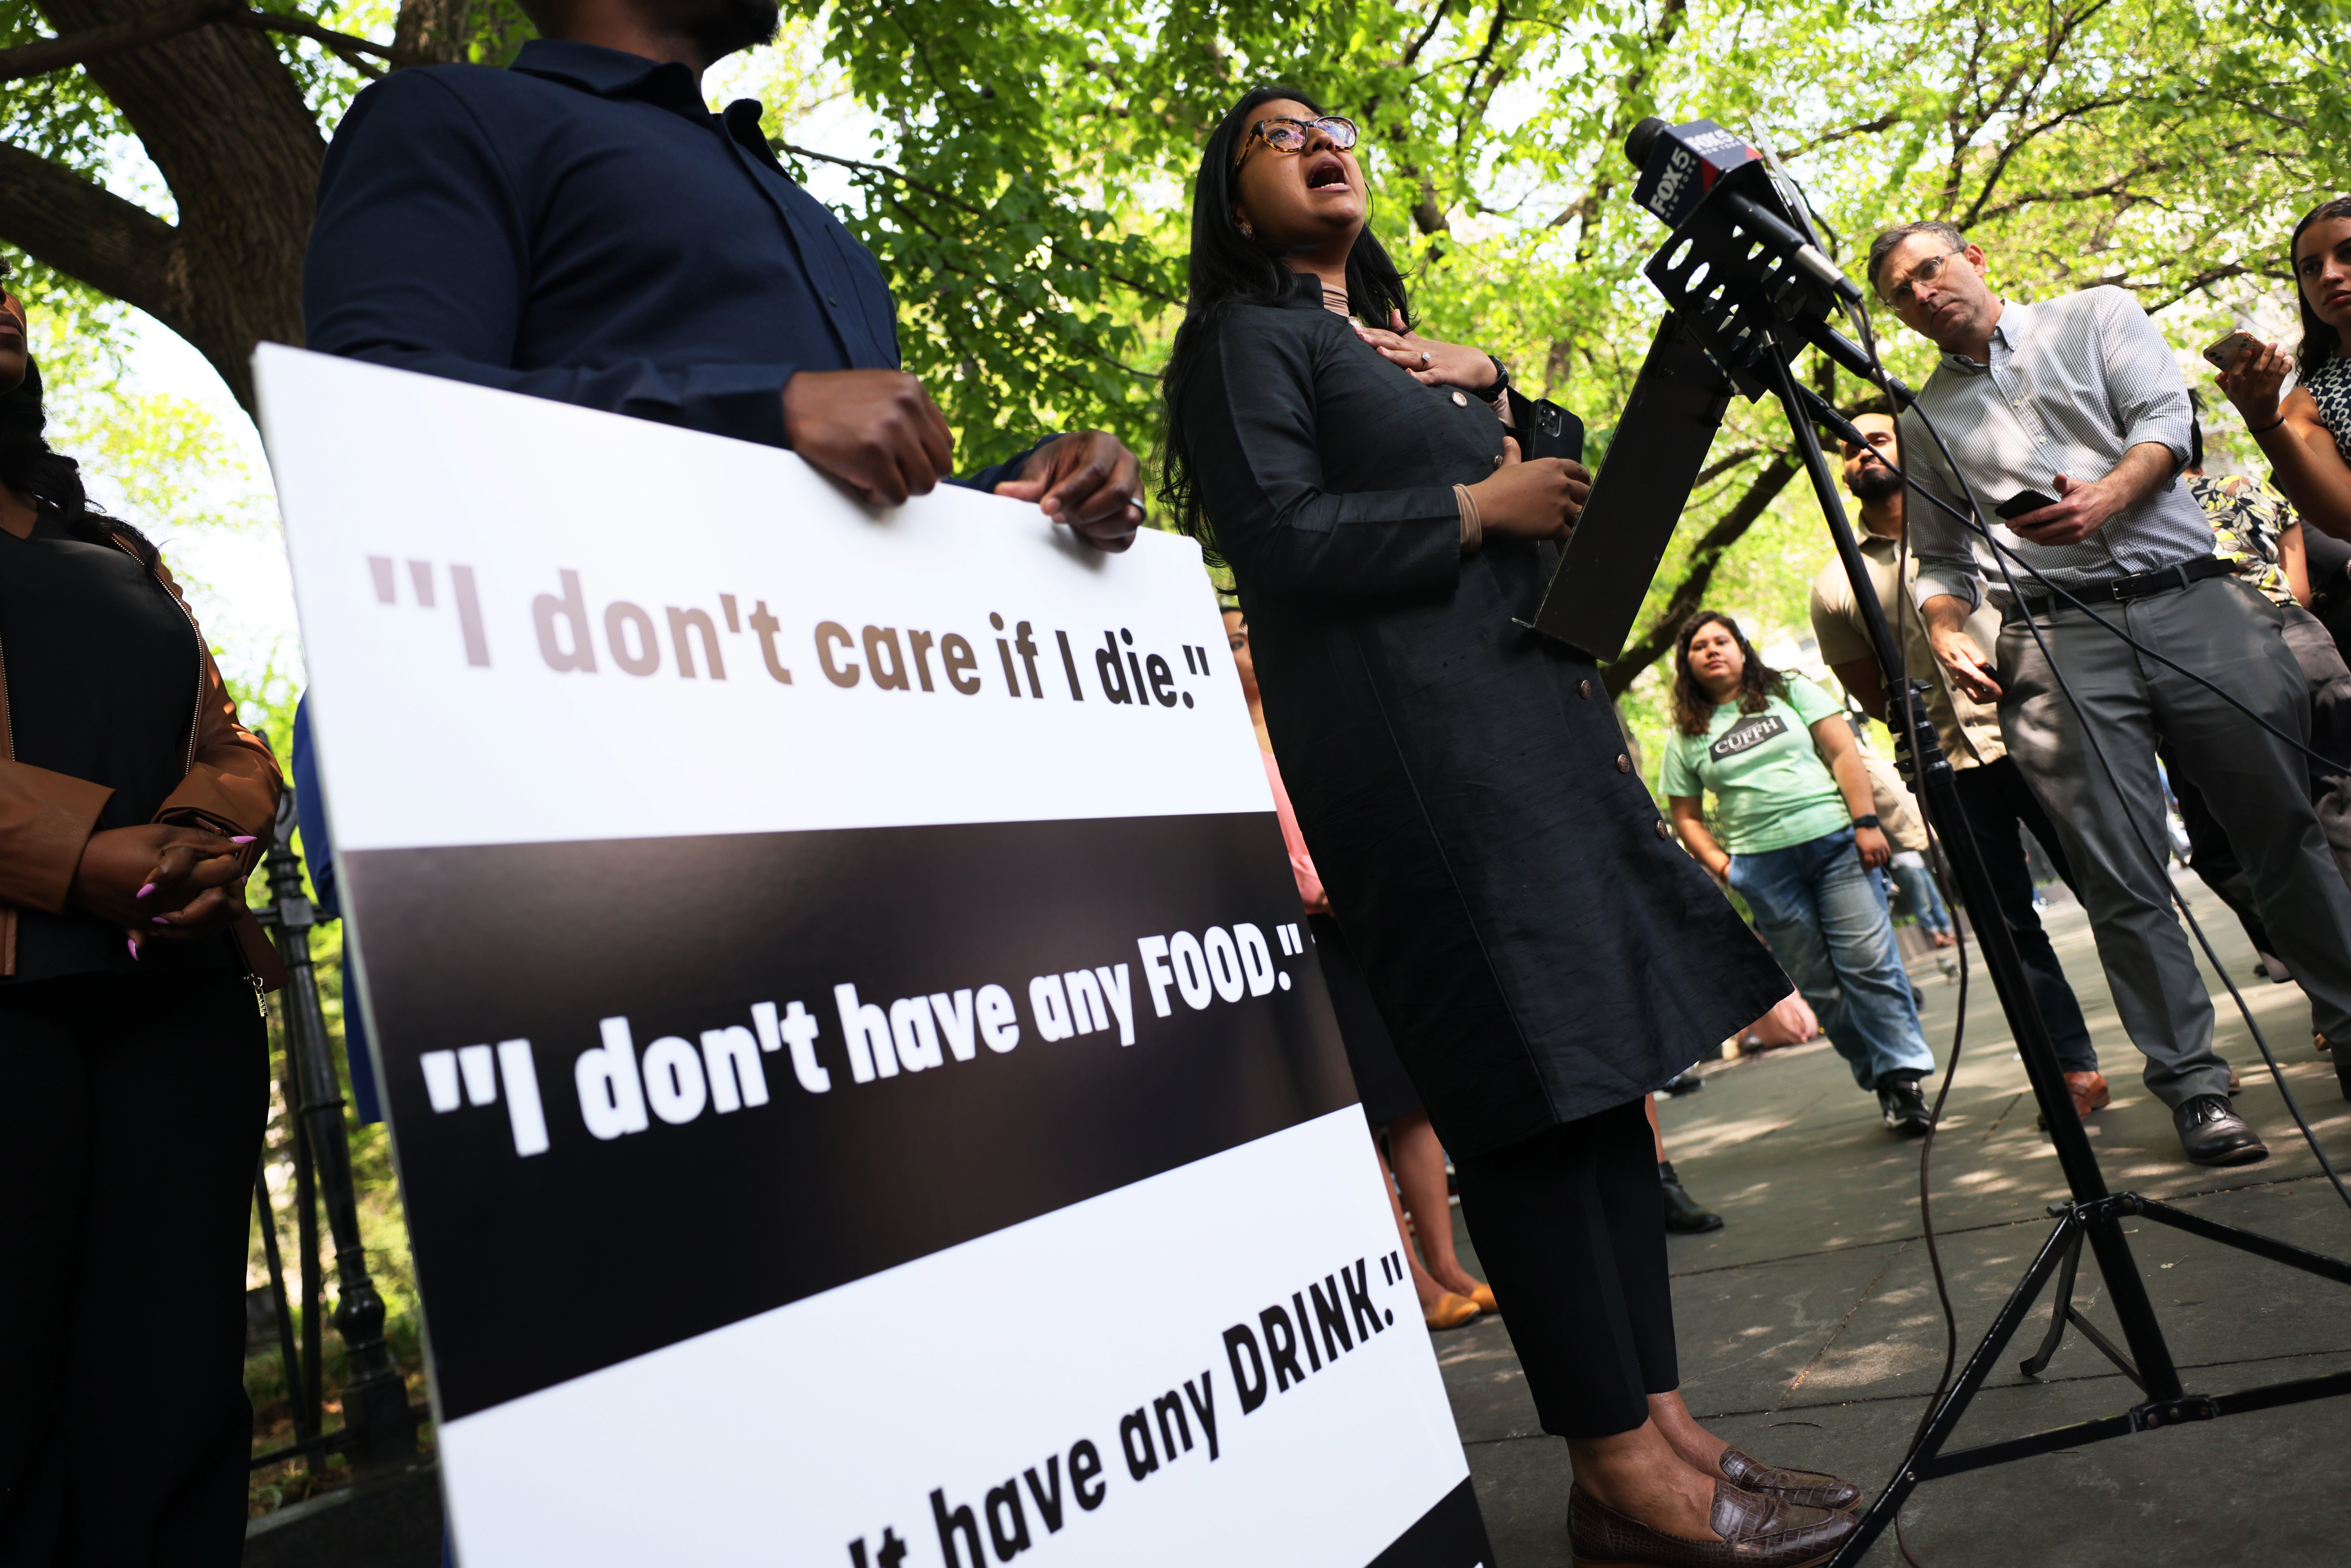 NEW YORK, NEW YORK - MAY 11: Councilmember Shahana Hanif speaks during a press conference at Park Row on May 11, 2023 in New York City. City Council members of the Black, Latino, and Asian Caucus were joined by advocates calling for charges to be brought against the man who killed Jordan Neely. Neely was killed ten days ago on the F train after being placed in a chokehold at the Broadway-Lafayette station by 24-year-old former Marine Daniel Penny. Witnesses reported that Neely had not physically attacked anyone before being placed in the chokehold. Penny was taken into custody by the NYPD for questioning and later released. Neely's death has been ruled a homicide by the medical examiner's office. (Photo by Michael M. Santiago/Getty Images)